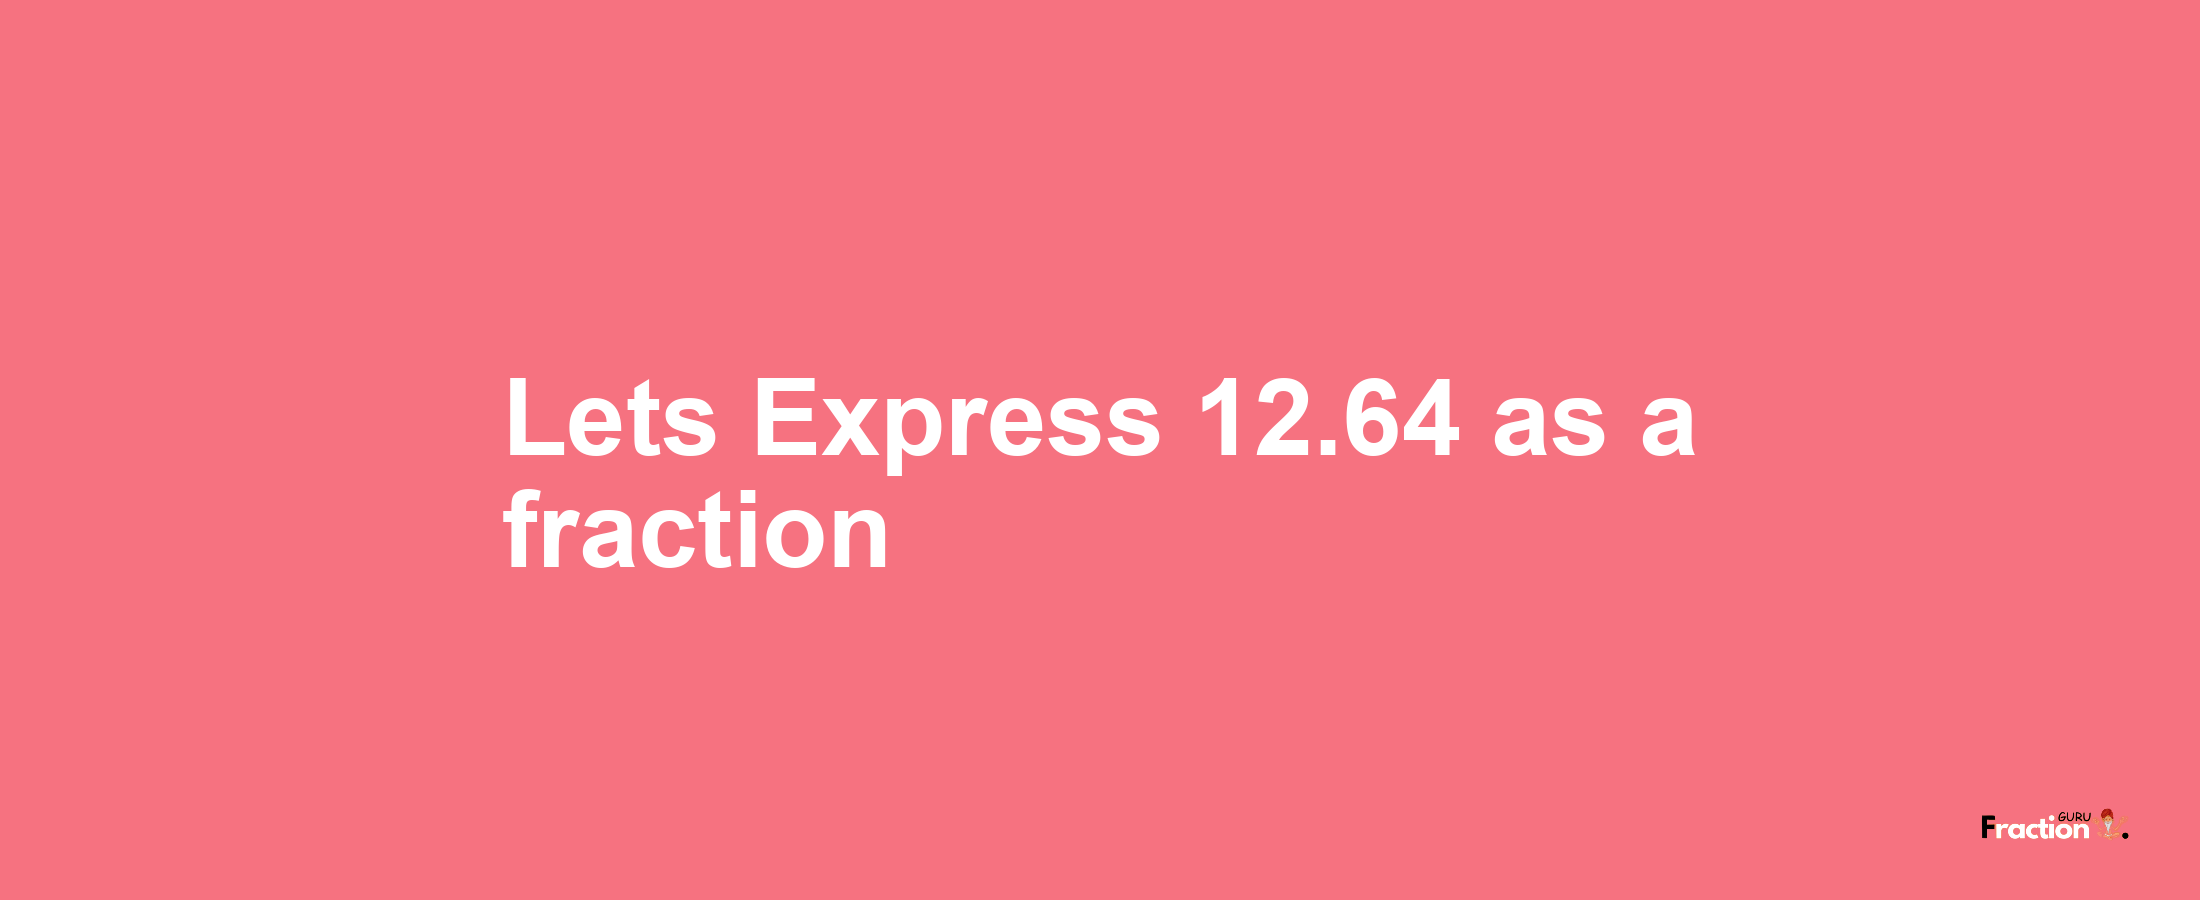 Lets Express 12.64 as afraction